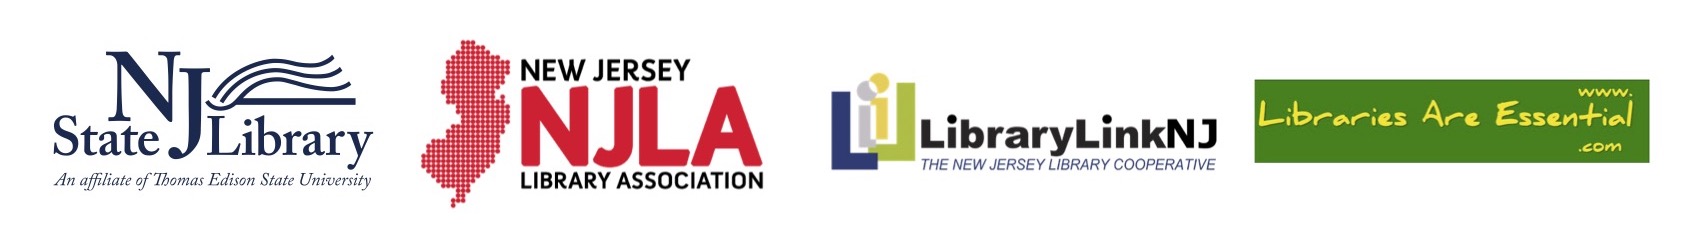 New Jersey State Library, New Jersey Library Association, Library Link NJ, and Libraries are Essential